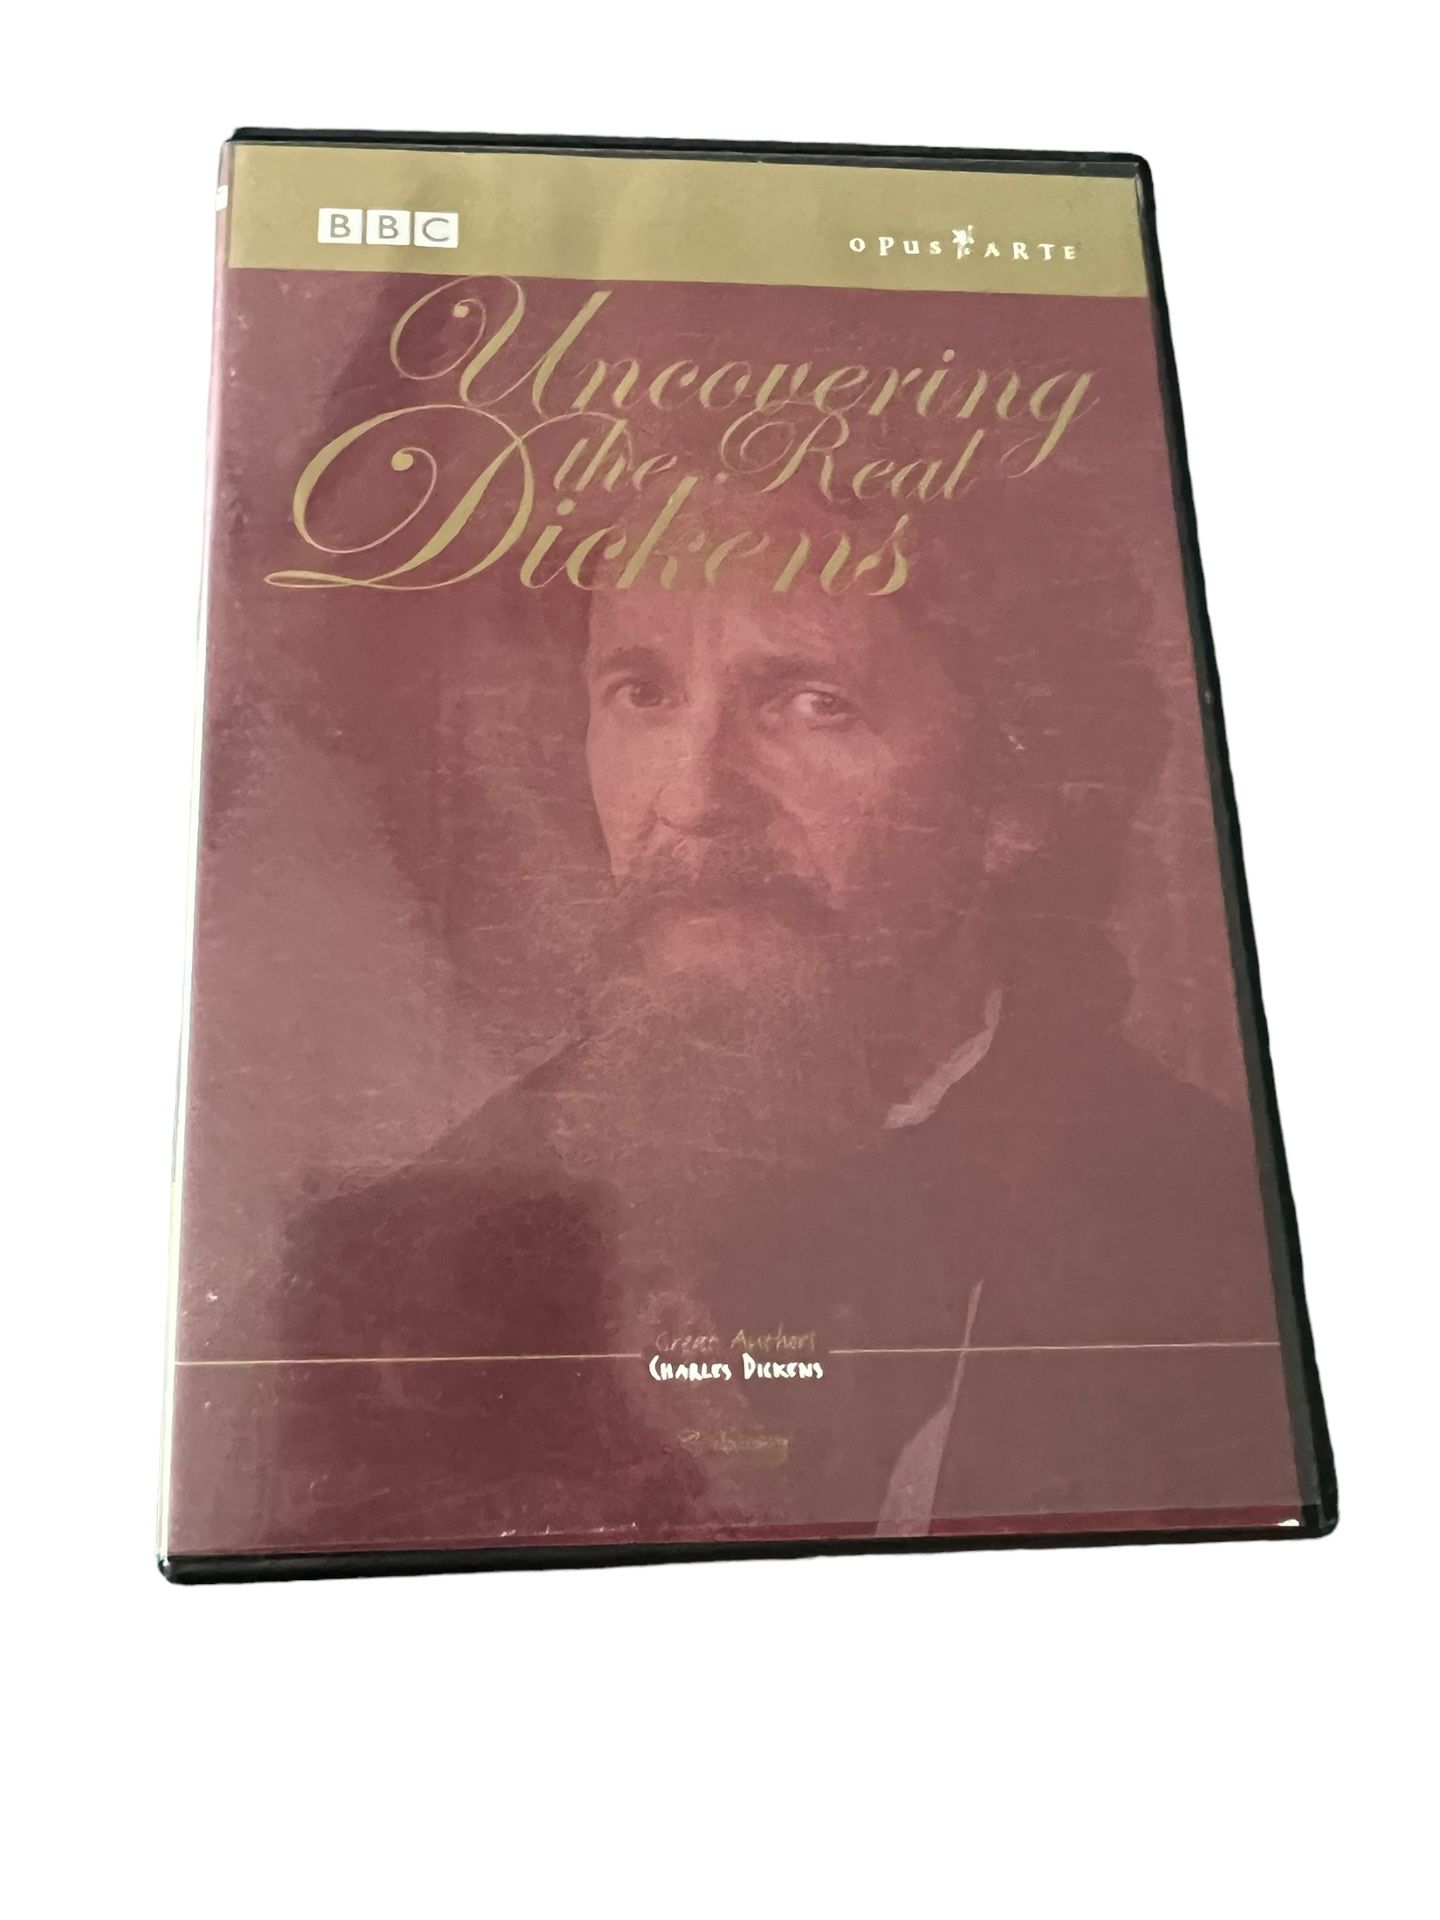 Uncovering The Real Dickens BBC DVD  Immerse yourself in the life of Charles Dickens with this captivating BBC DVD titled "Uncovering The Real Dickens